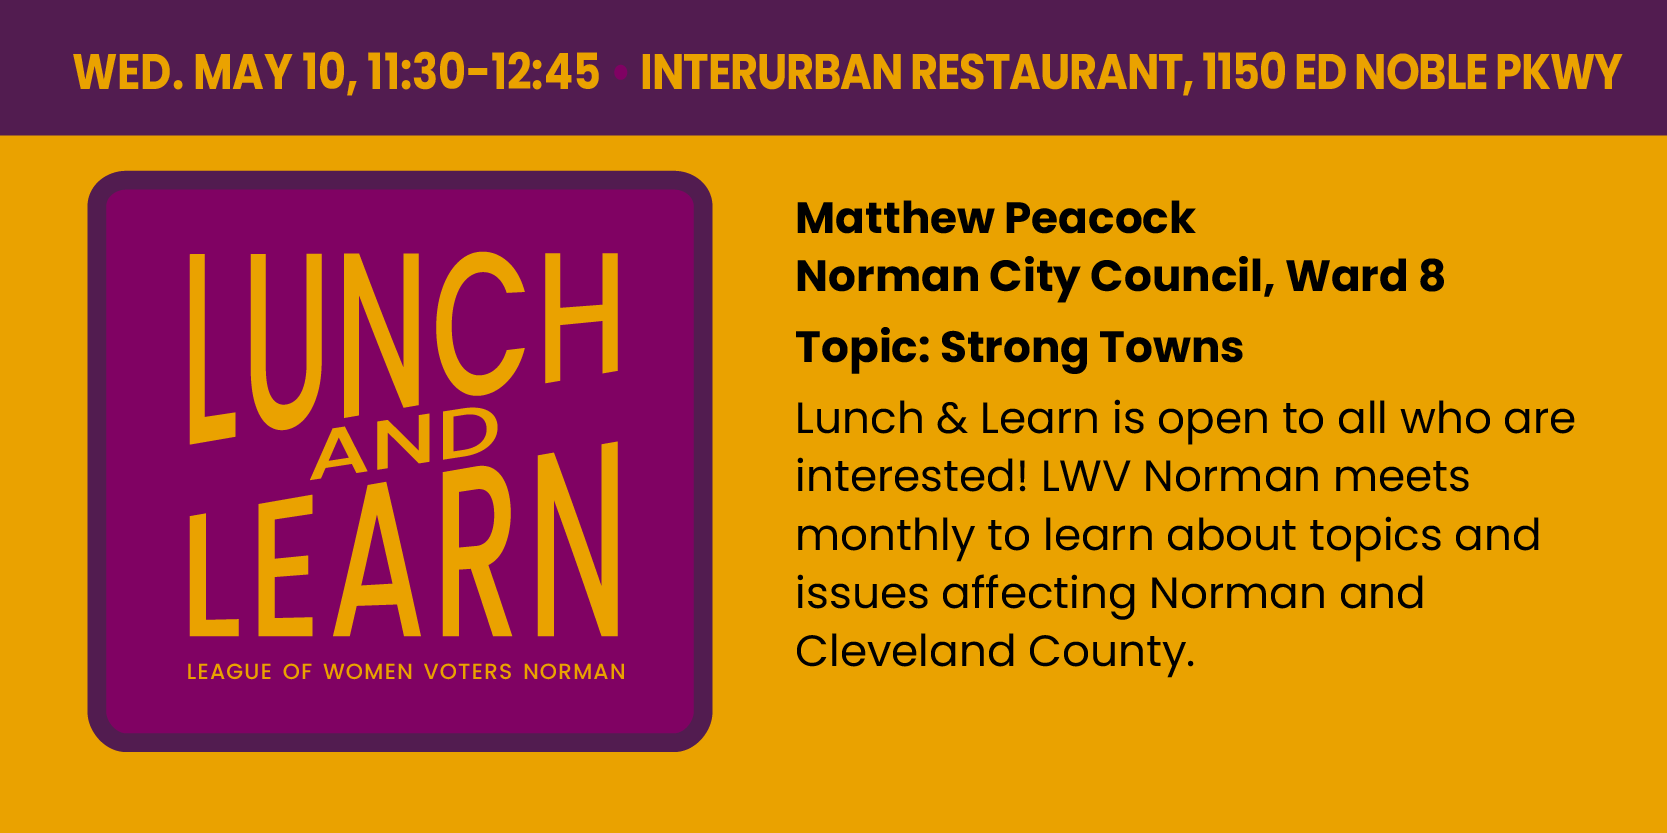 Lunch and Learn at the Interurban!